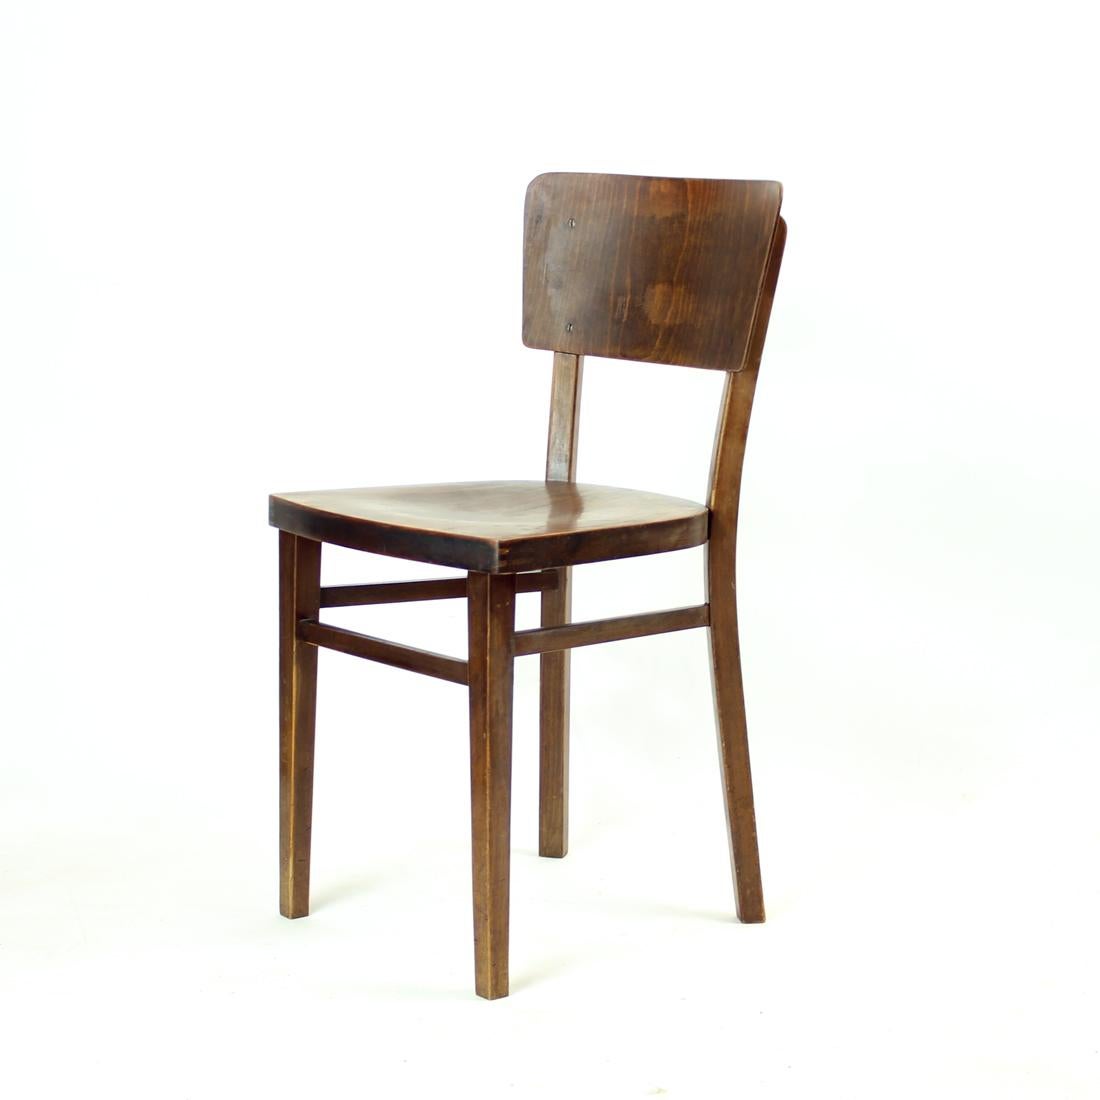 Mid-20th Century 1940s Wooden Chair, Frenstat Czechoslovakia For Sale